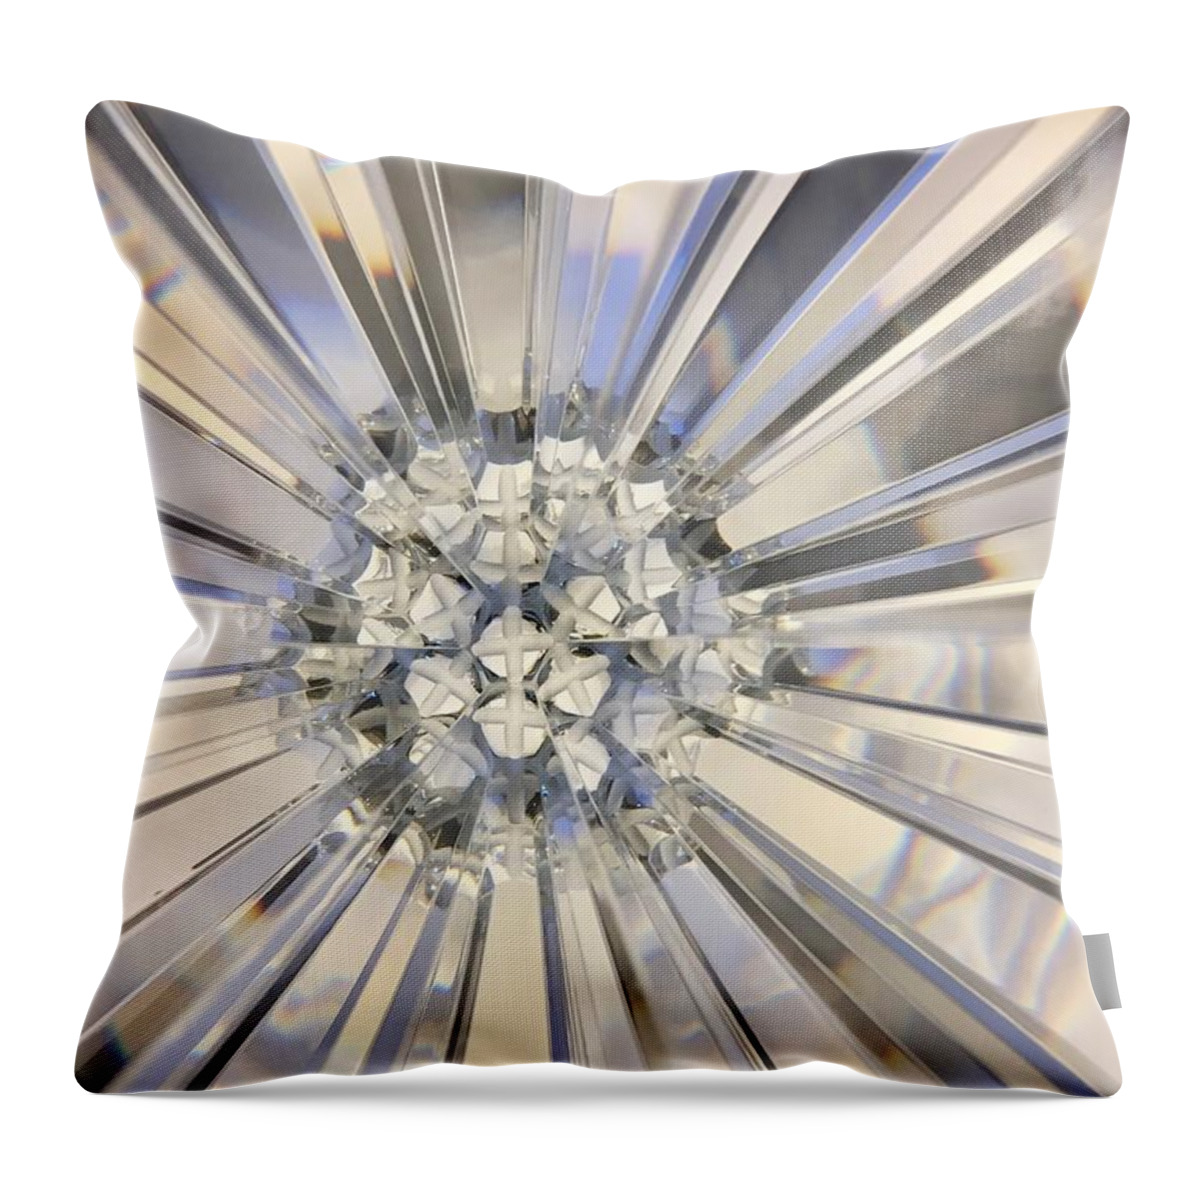 White Light Throw Pillow featuring the photograph Color Series 1-14 by J Doyne Miller